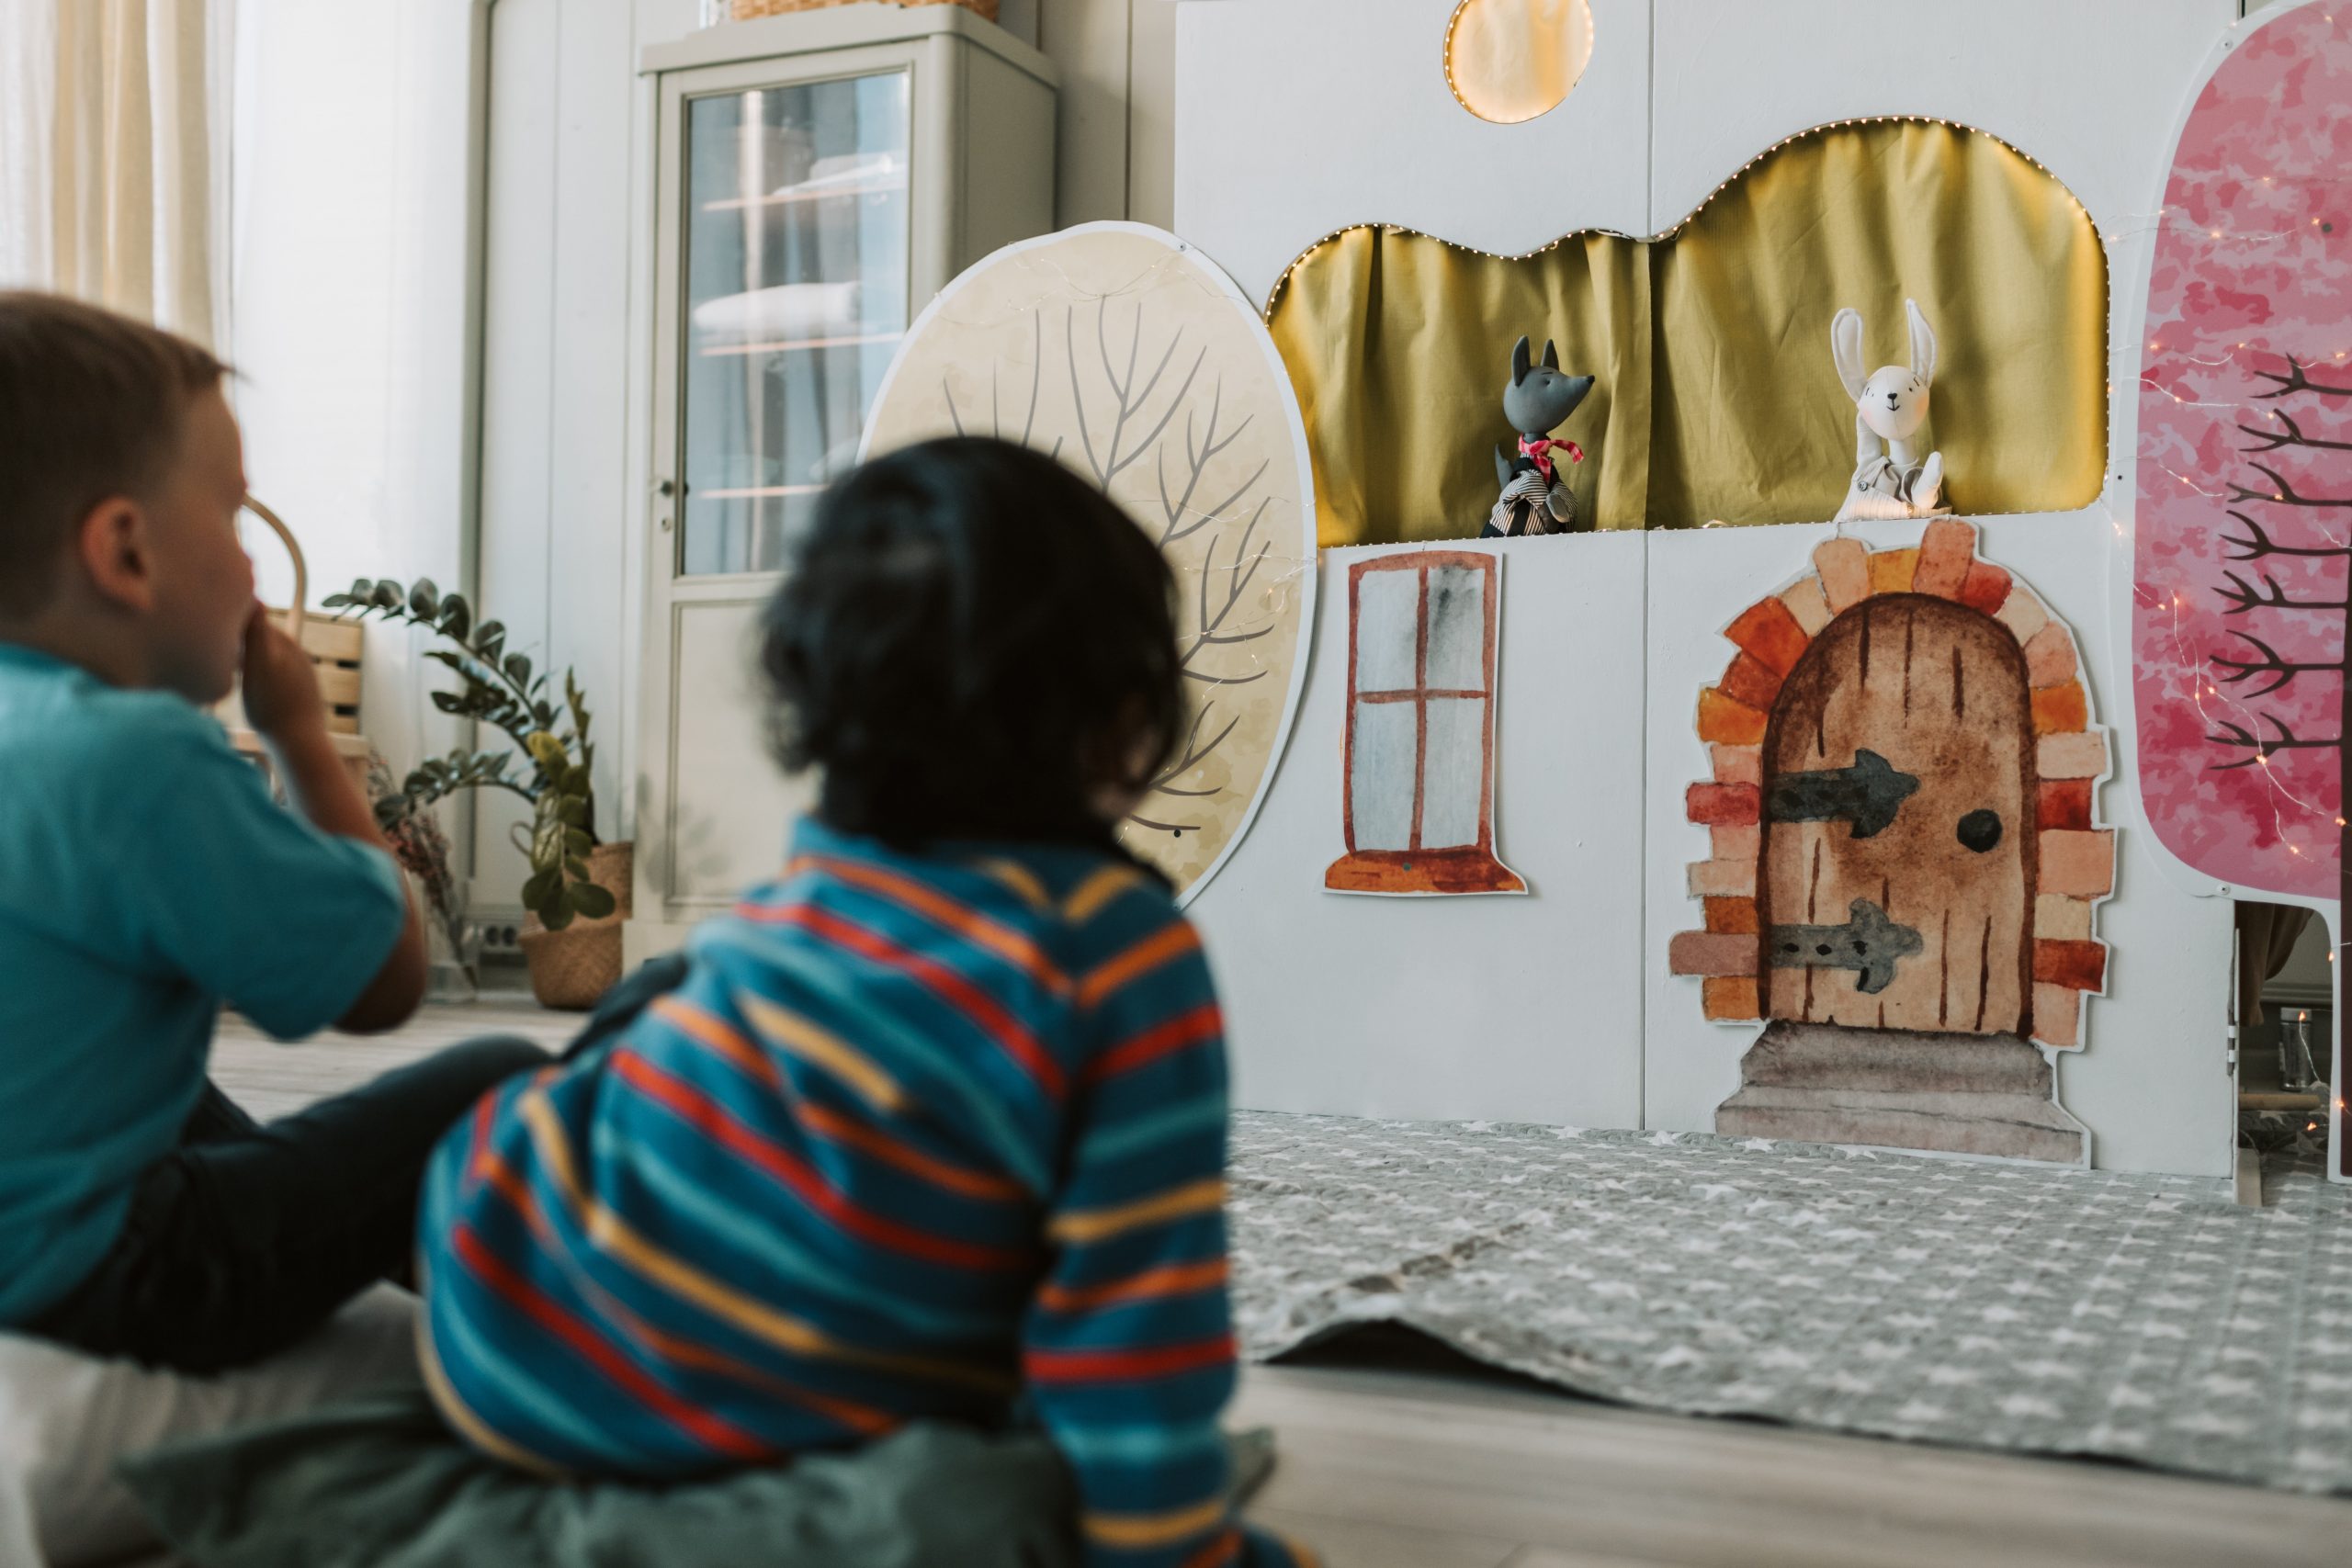 A Boy in Striped Shirt Sitting Watching a Puppet Theater